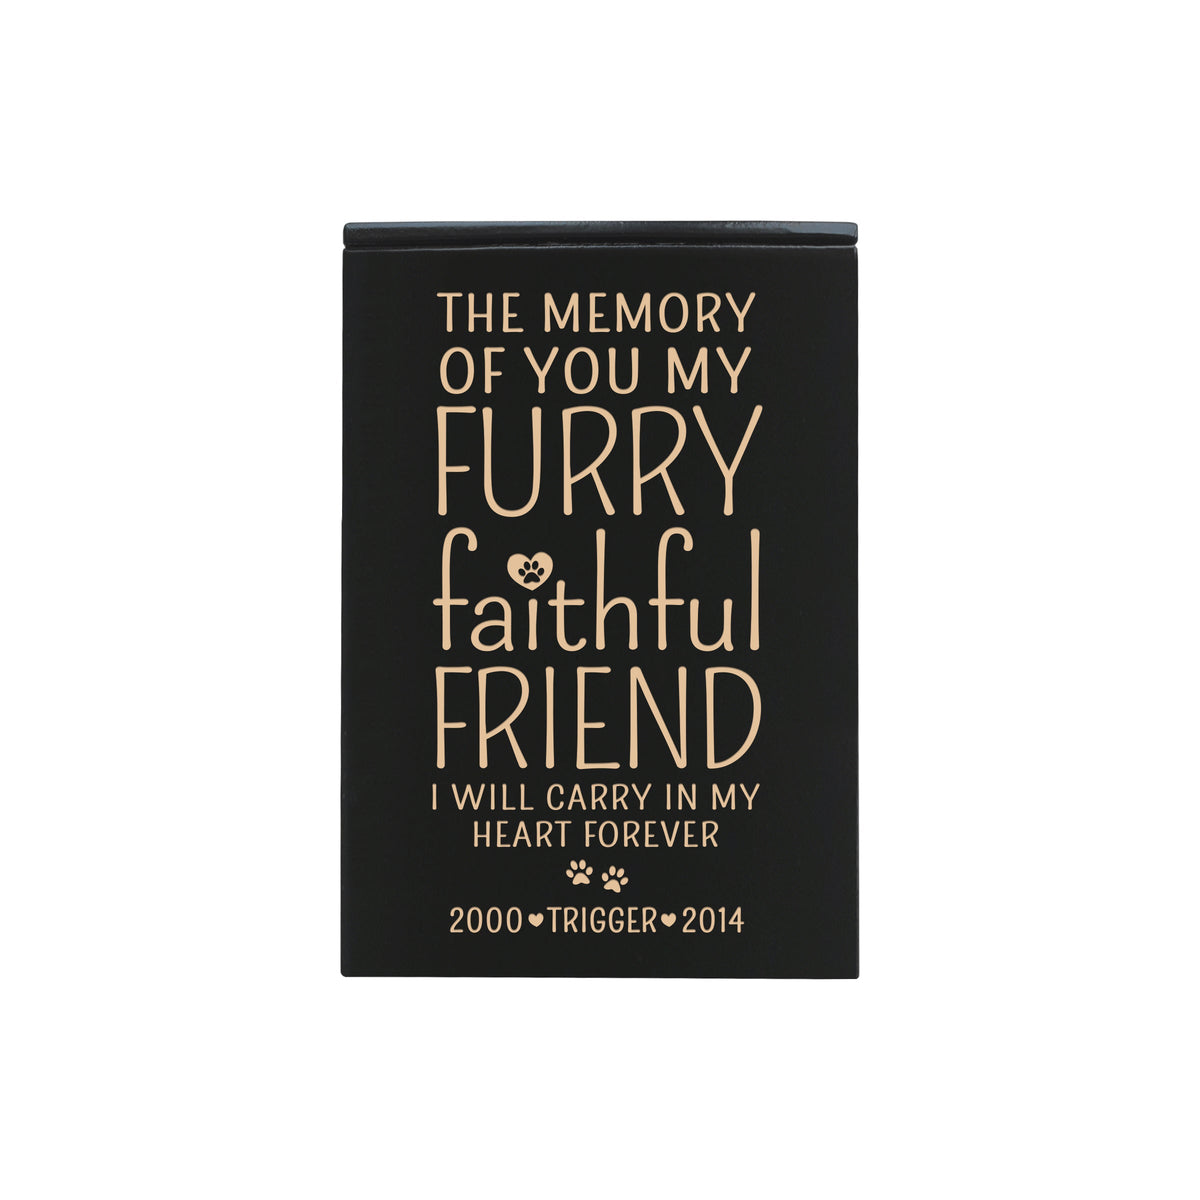 Pet Memorial Keepsake Cremation Urn Box For Dog or Cat - The Memory of You